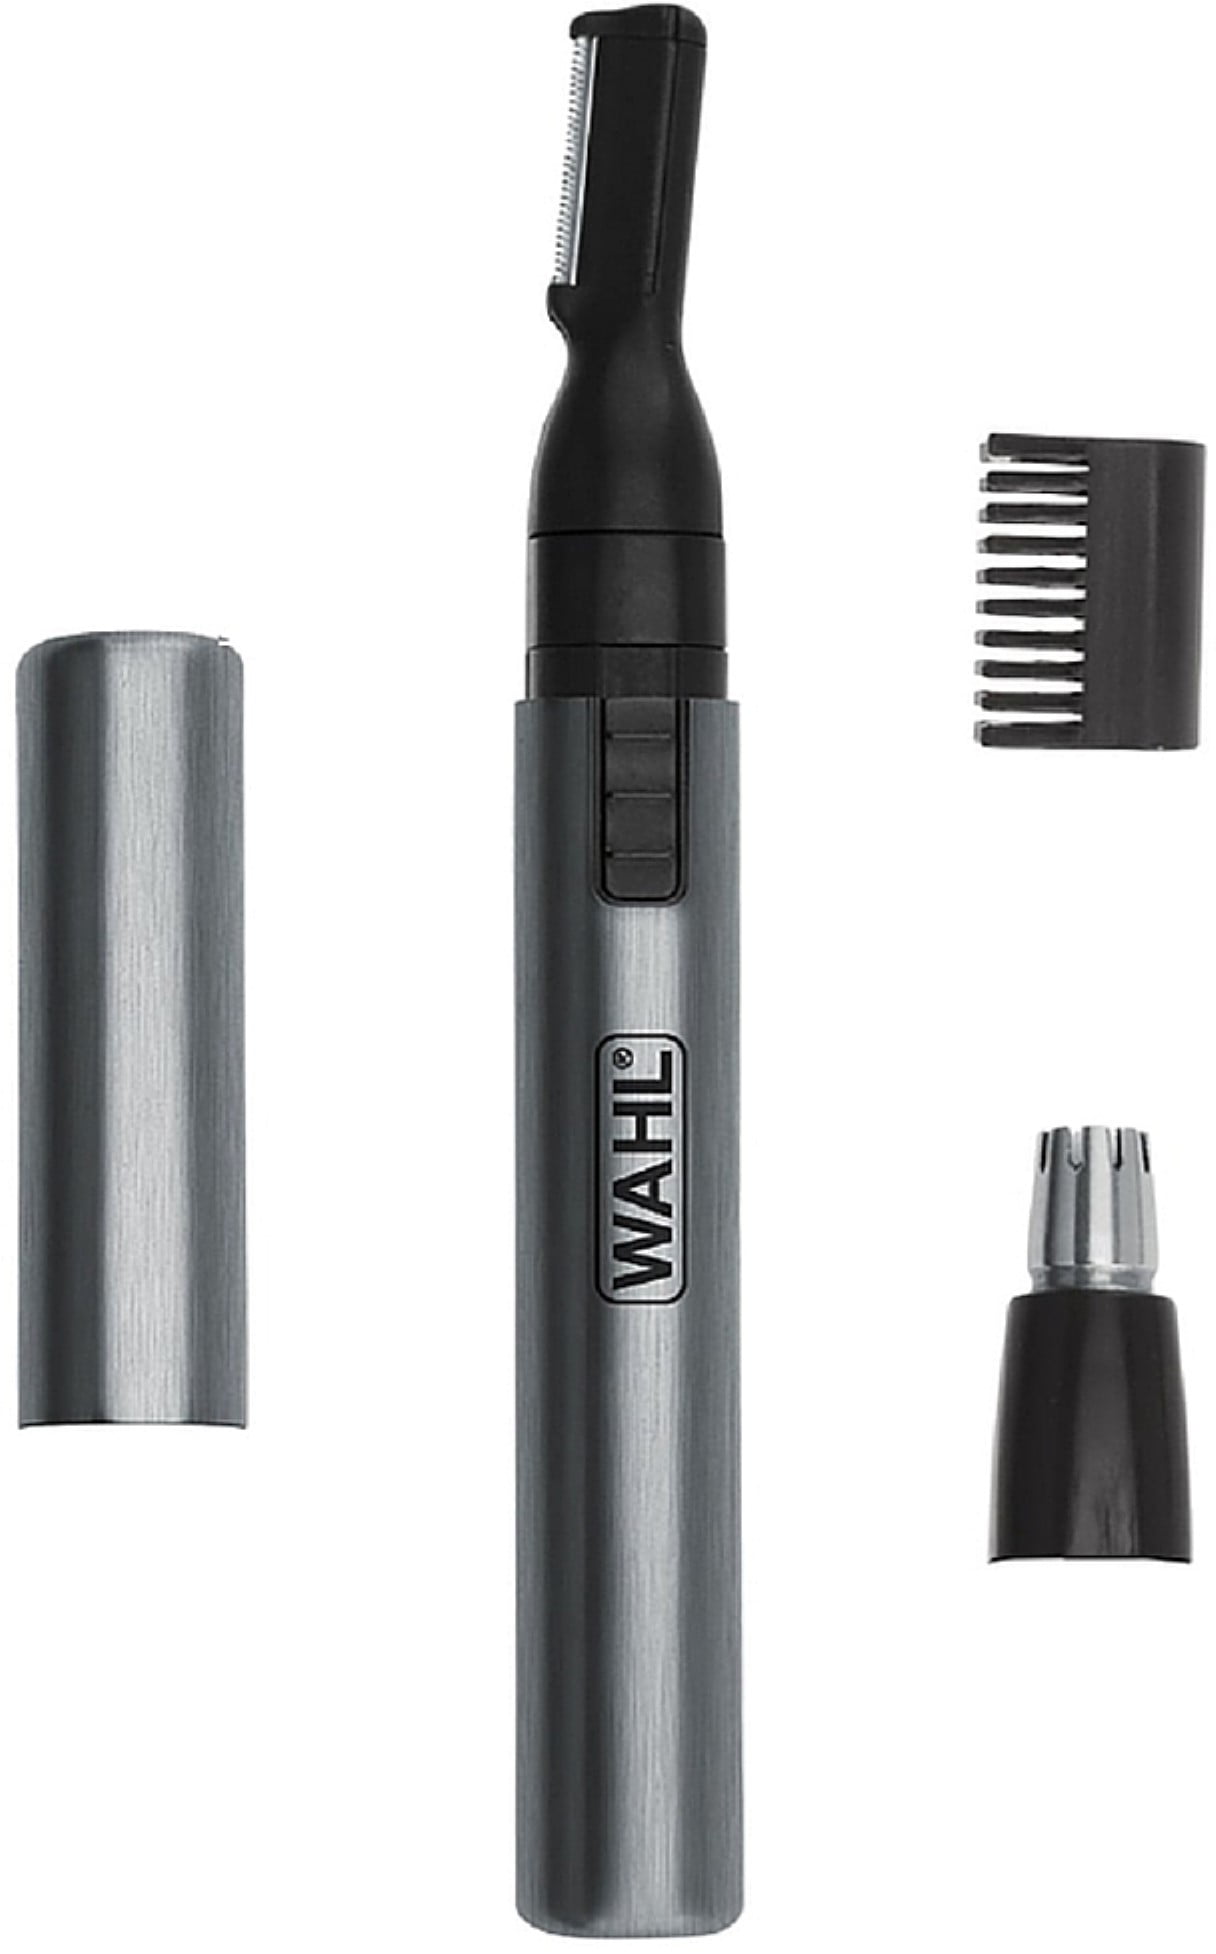 wahl 5640 micro trimmer